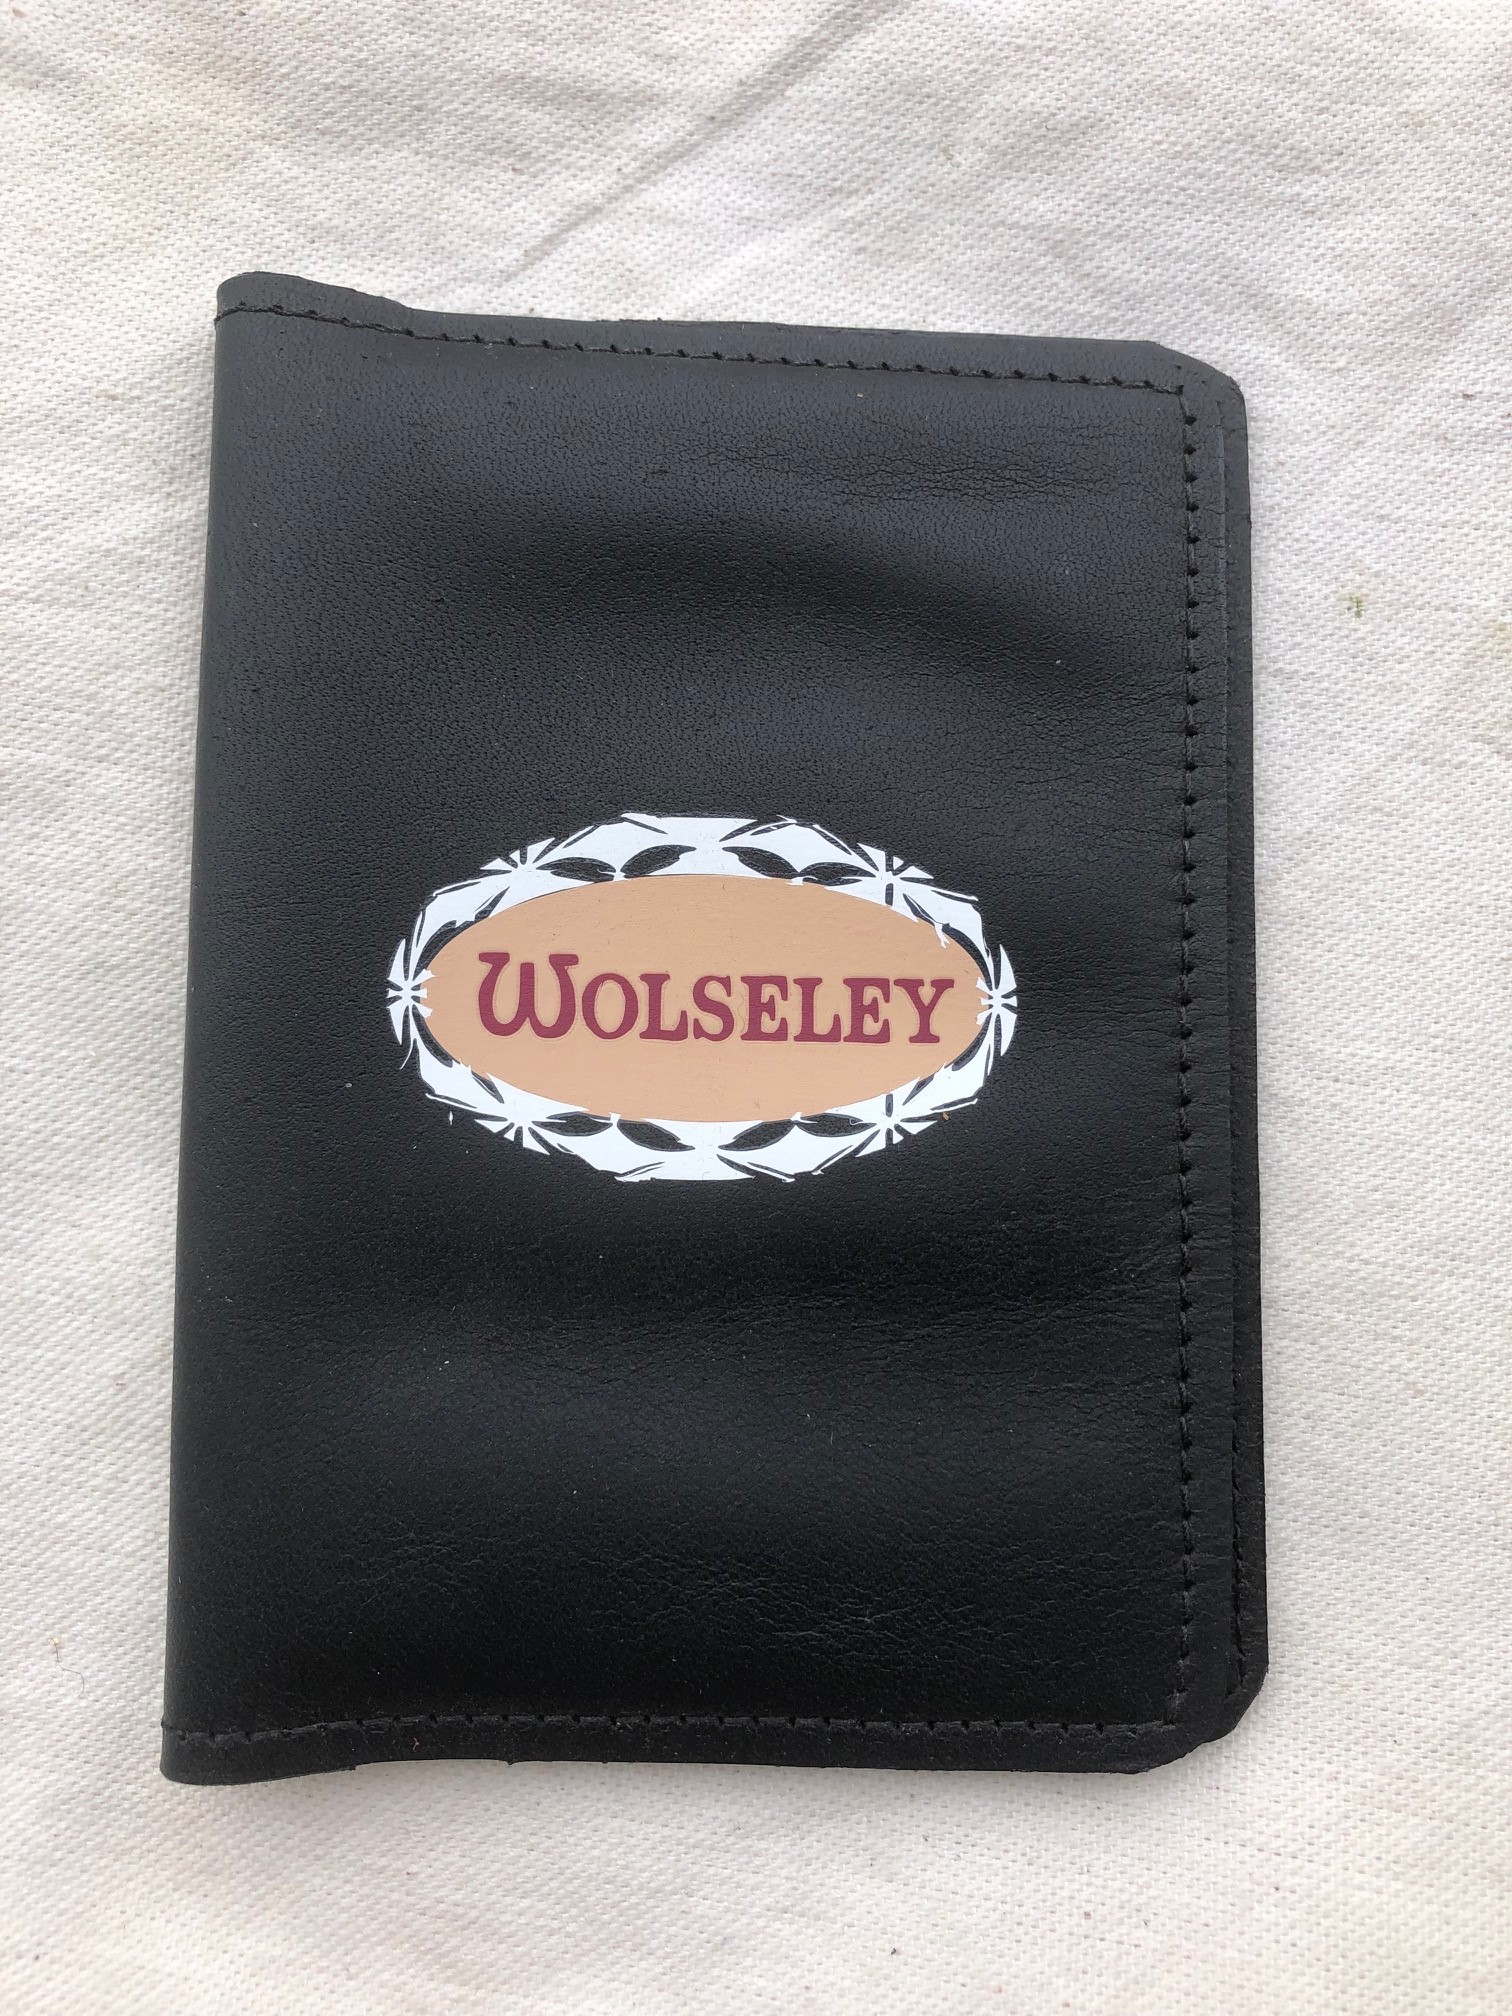 Wolseley Log Book Cover » Banners and Badges